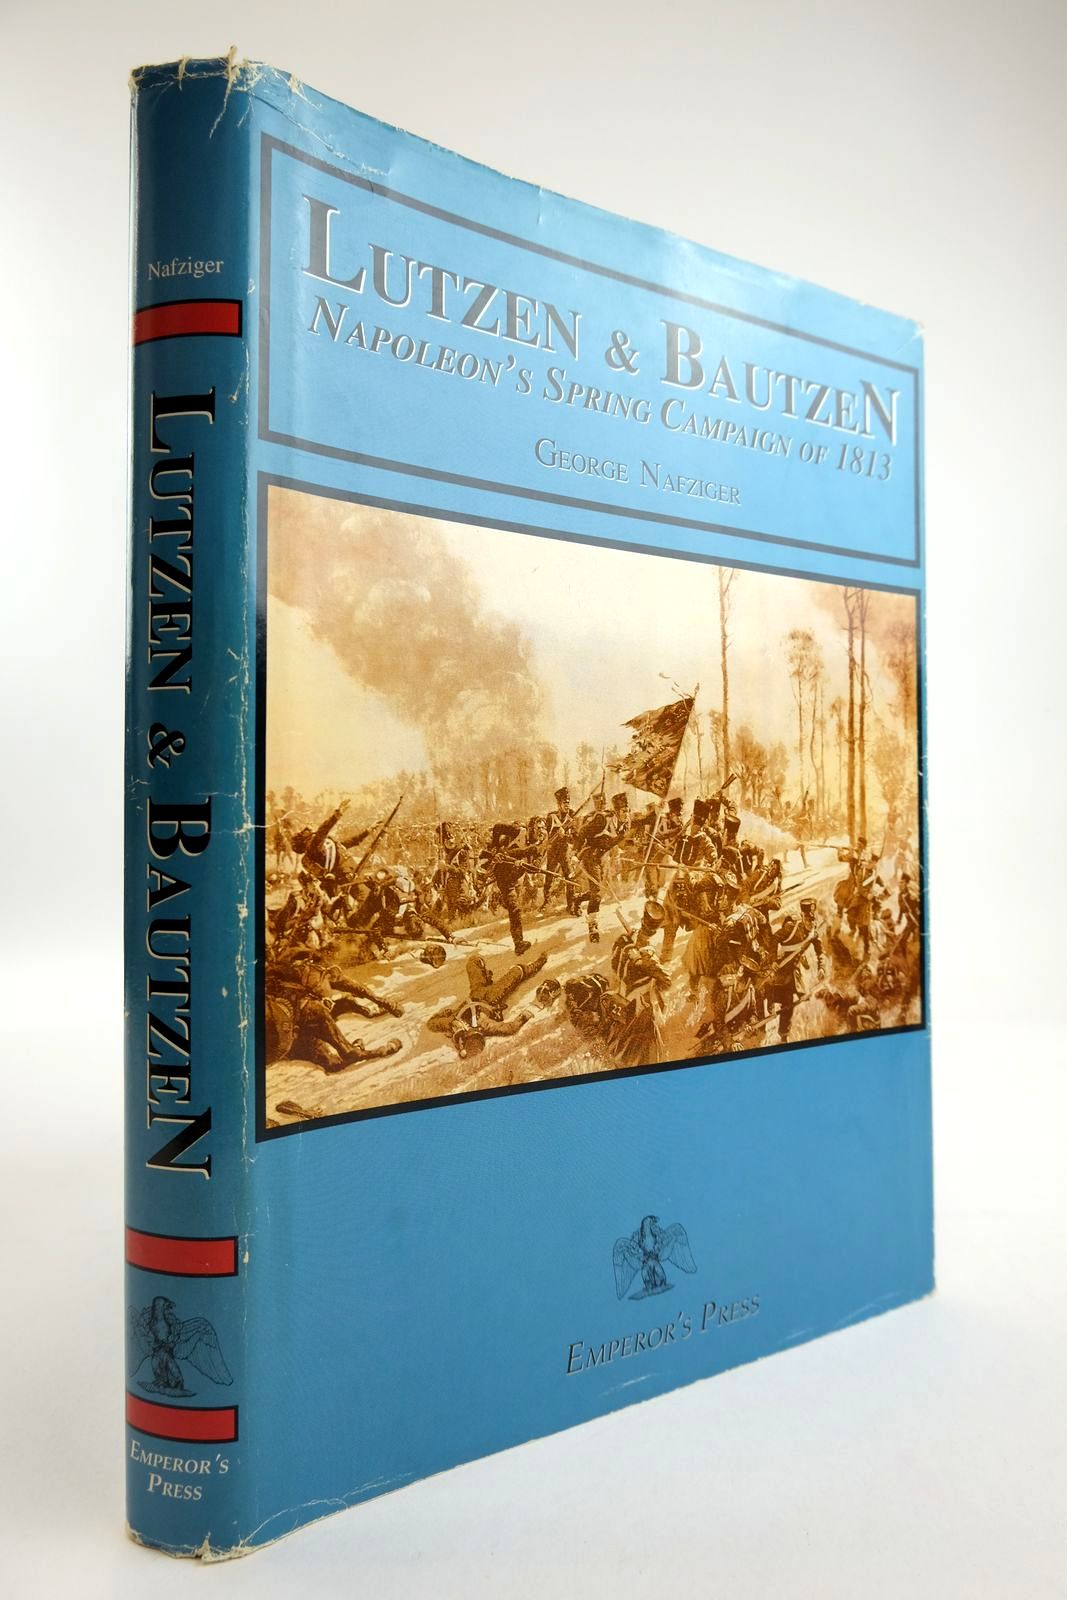 Photo of LUTZEN & BAUTZEN NAPOLEONS SPRING CAMPAIGN OF 1813 written by Nafziger, George published by Emperor's Press (STOCK CODE: 2134164)  for sale by Stella & Rose's Books